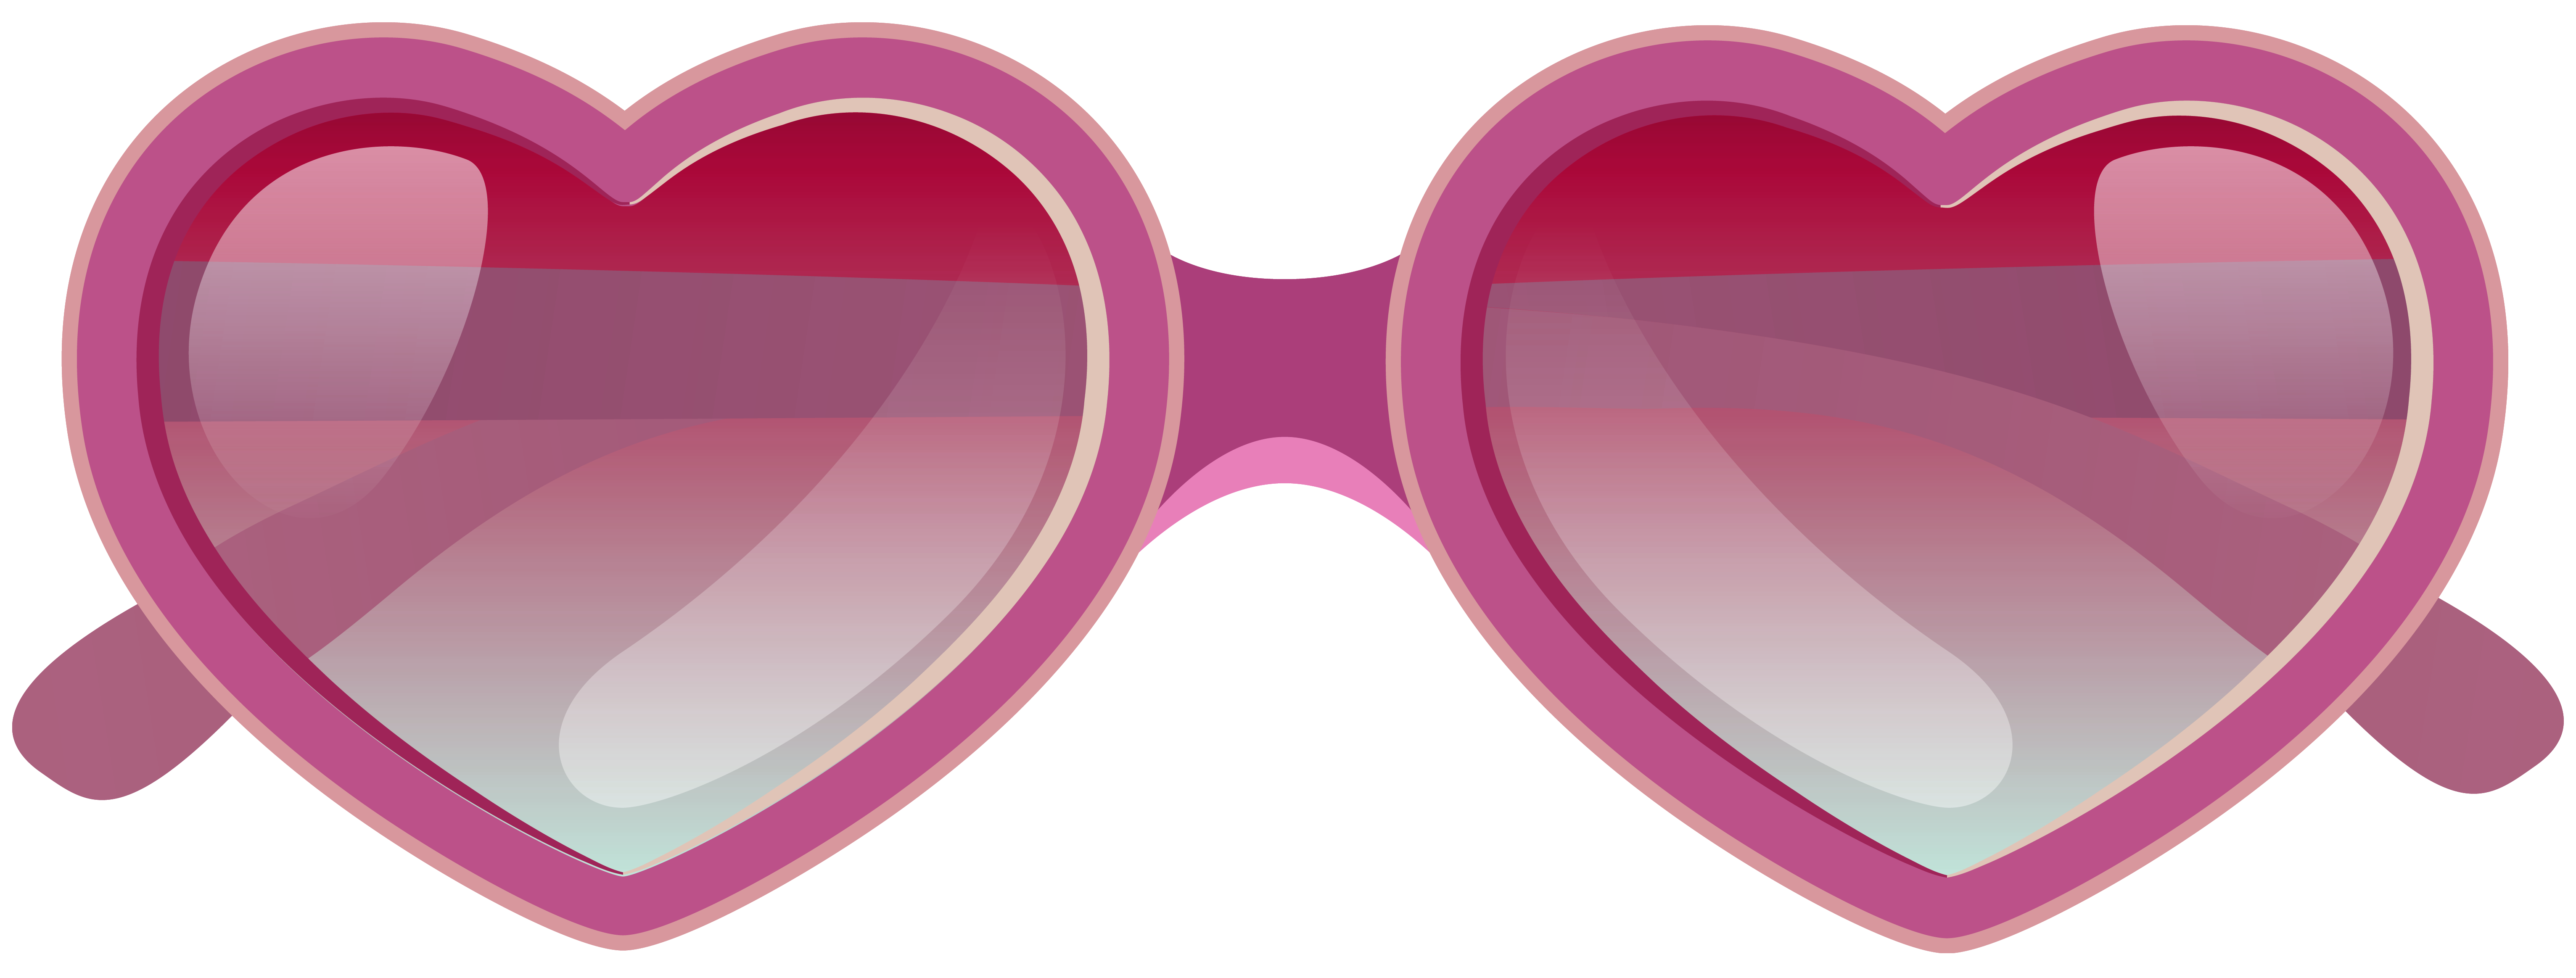 Pink heart sunglasses clipart image